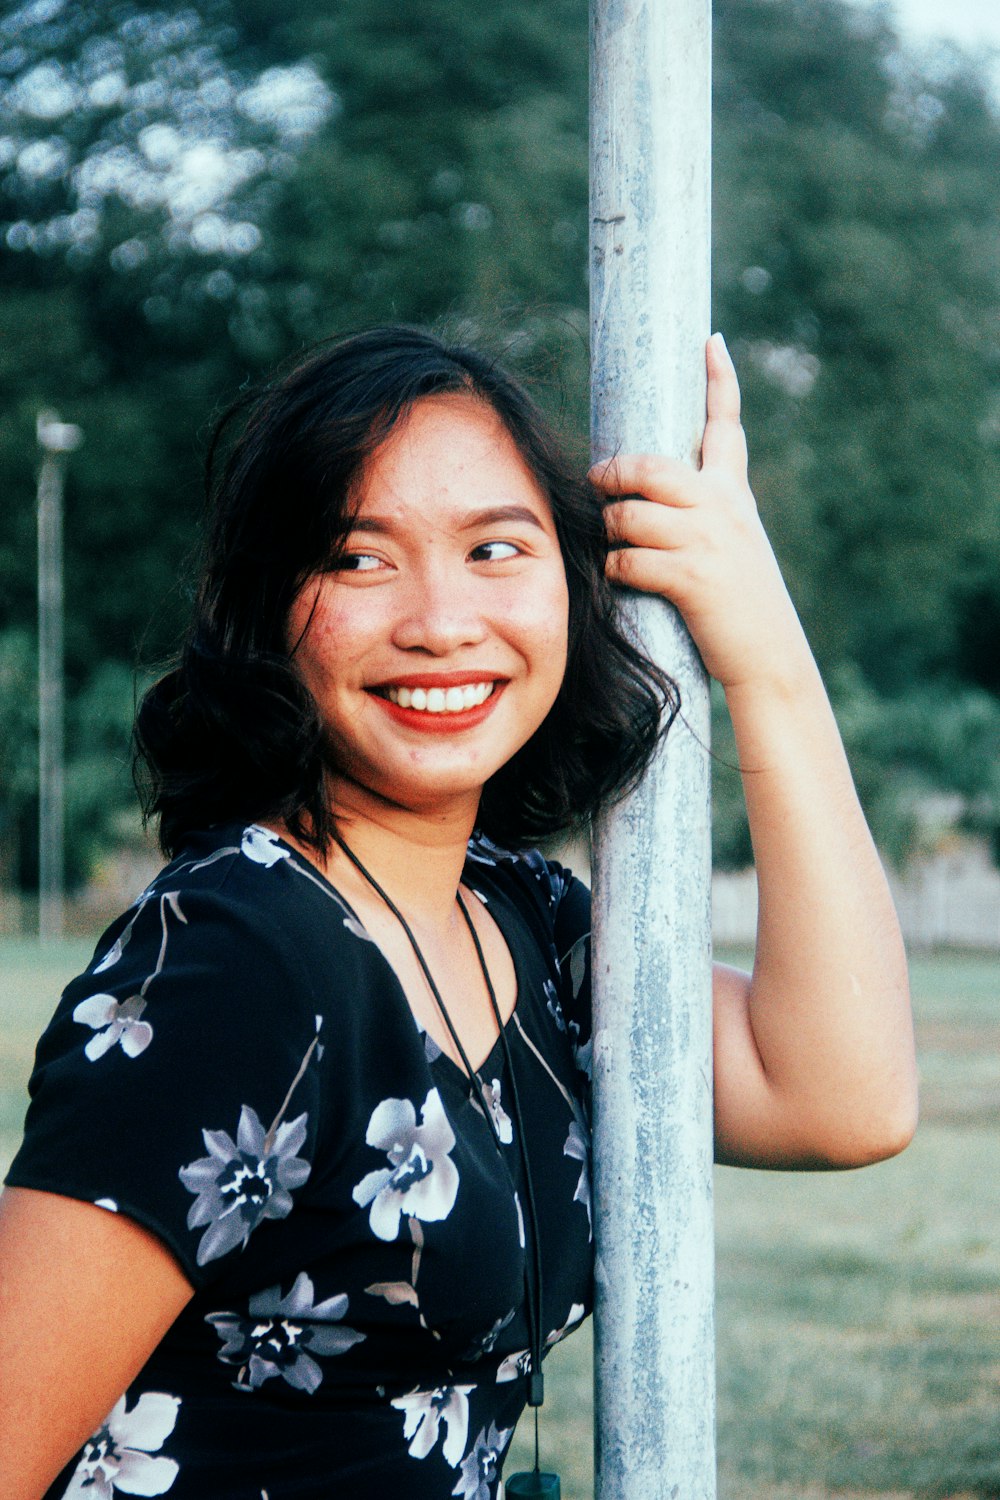 a woman leaning against a pole in a park